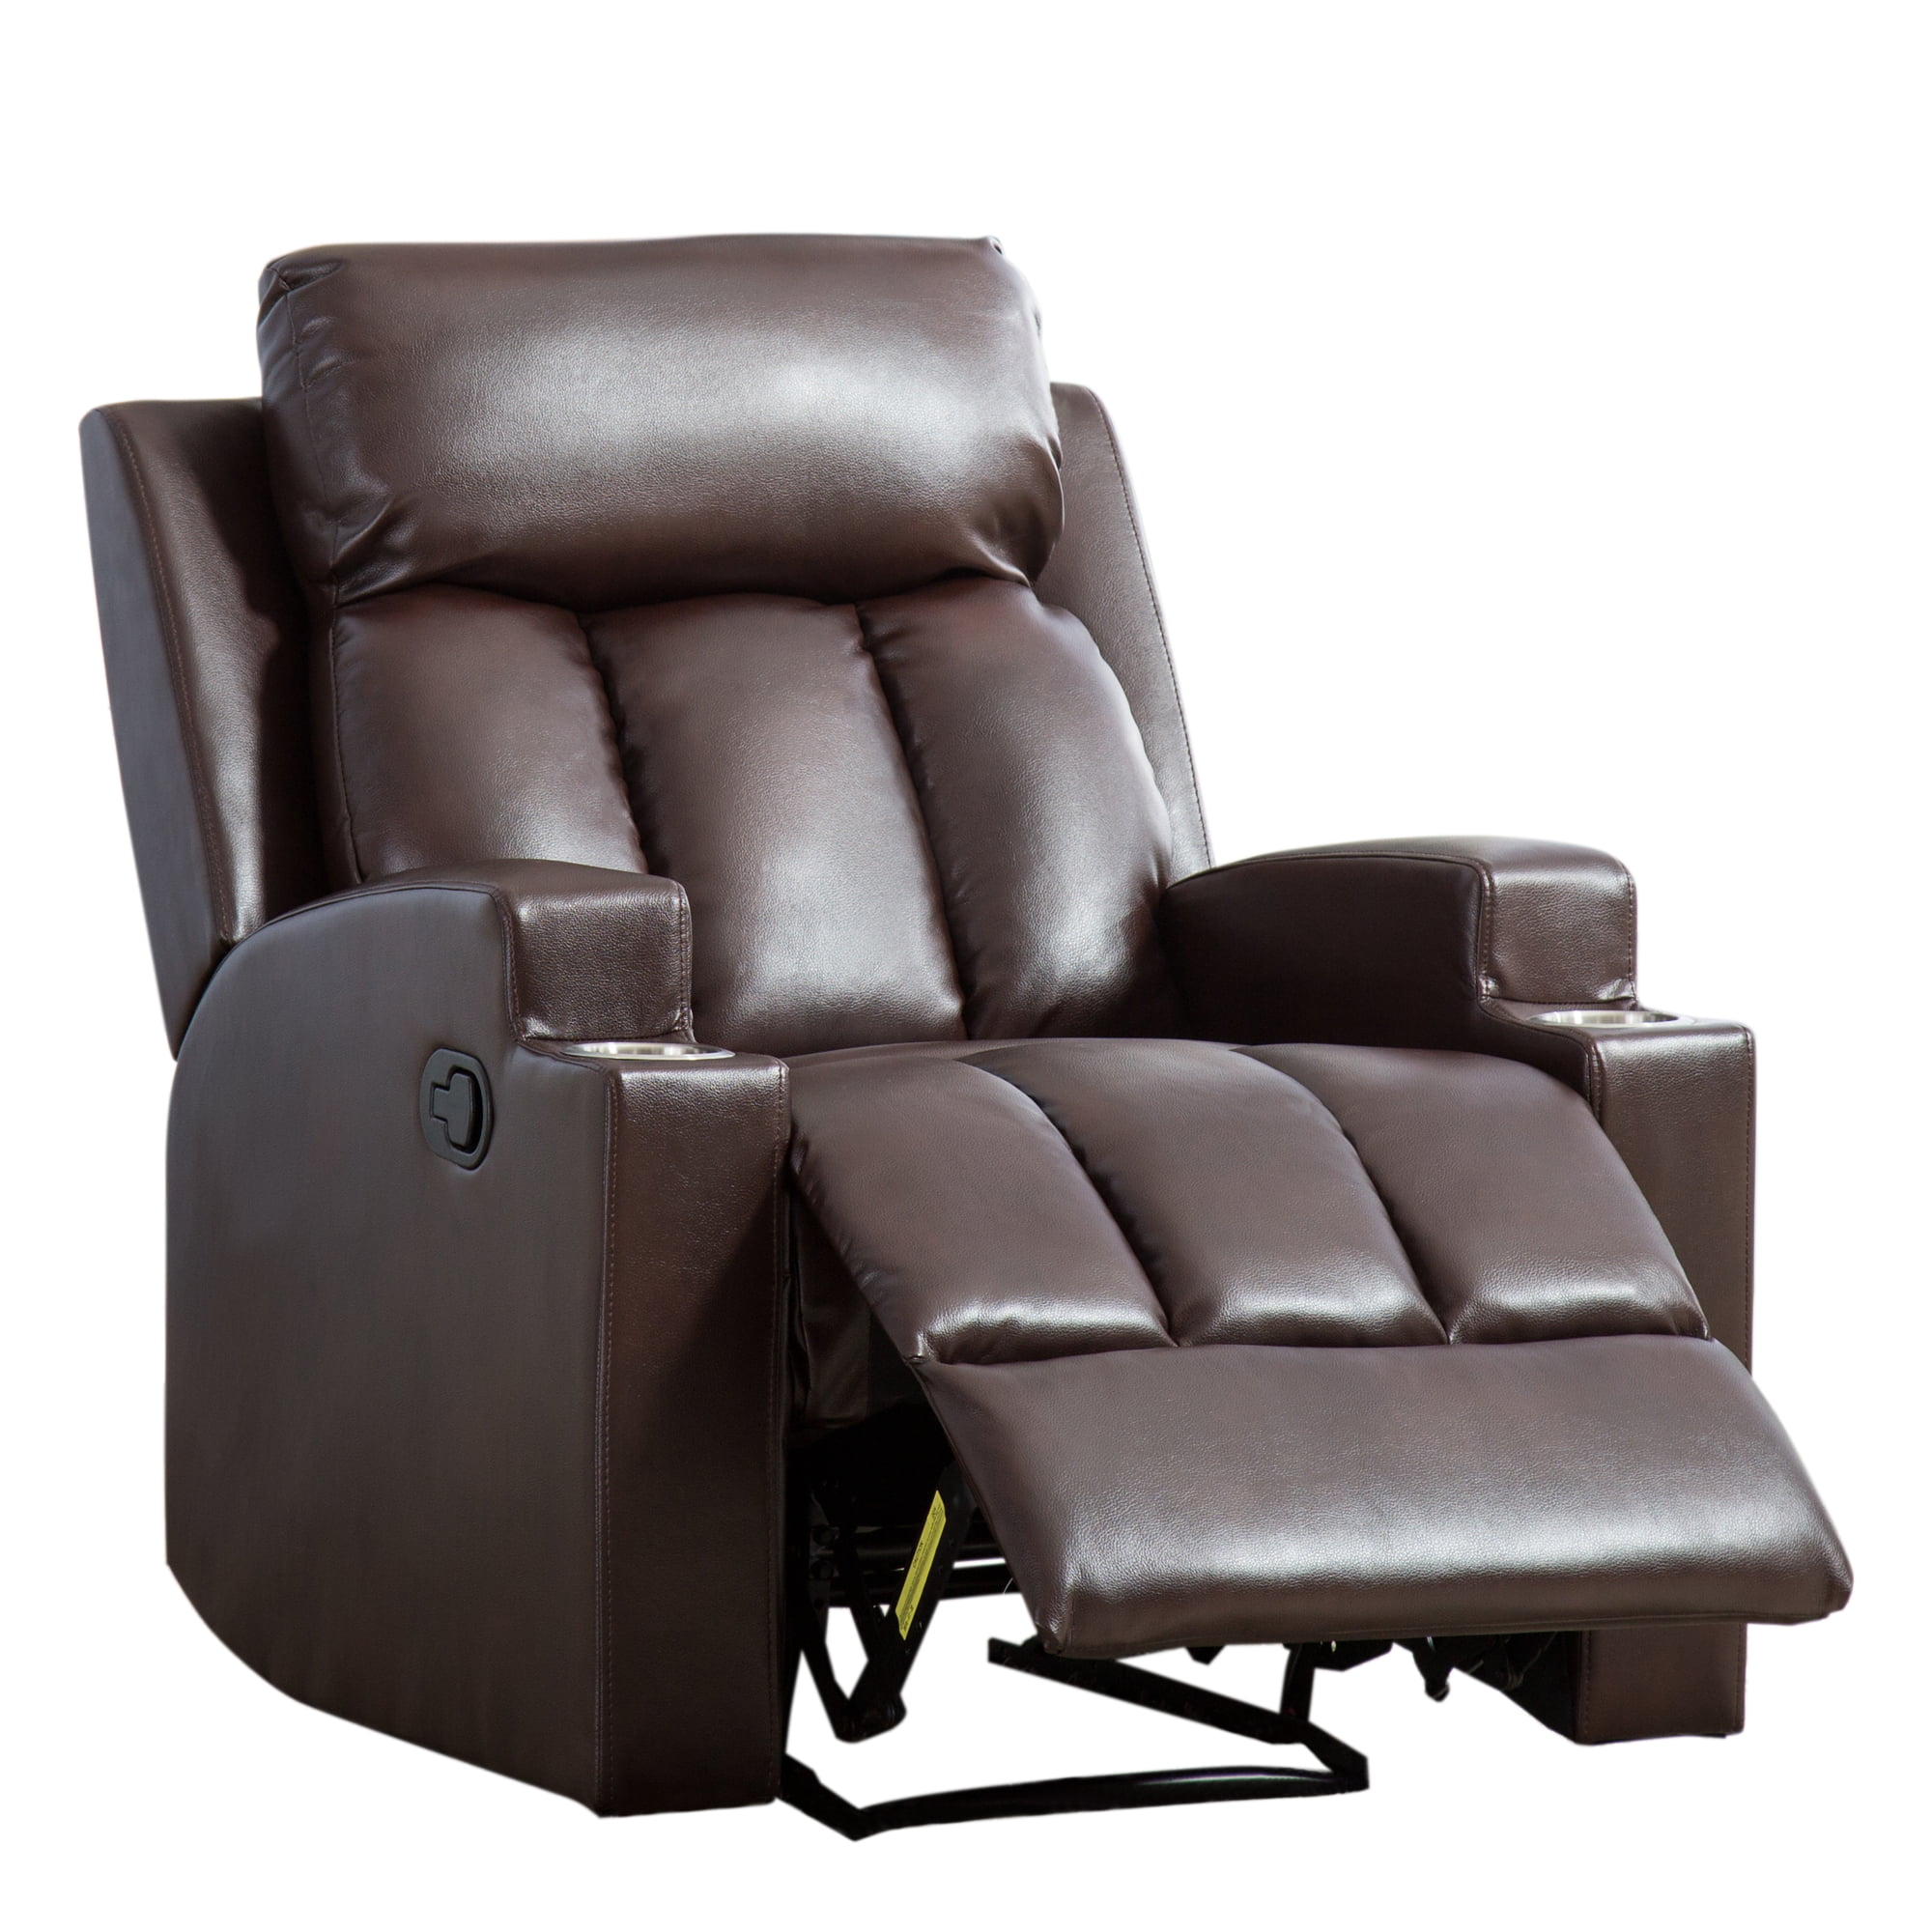 Breathable PU Leather Recliner Chair with 2 Cup Holders